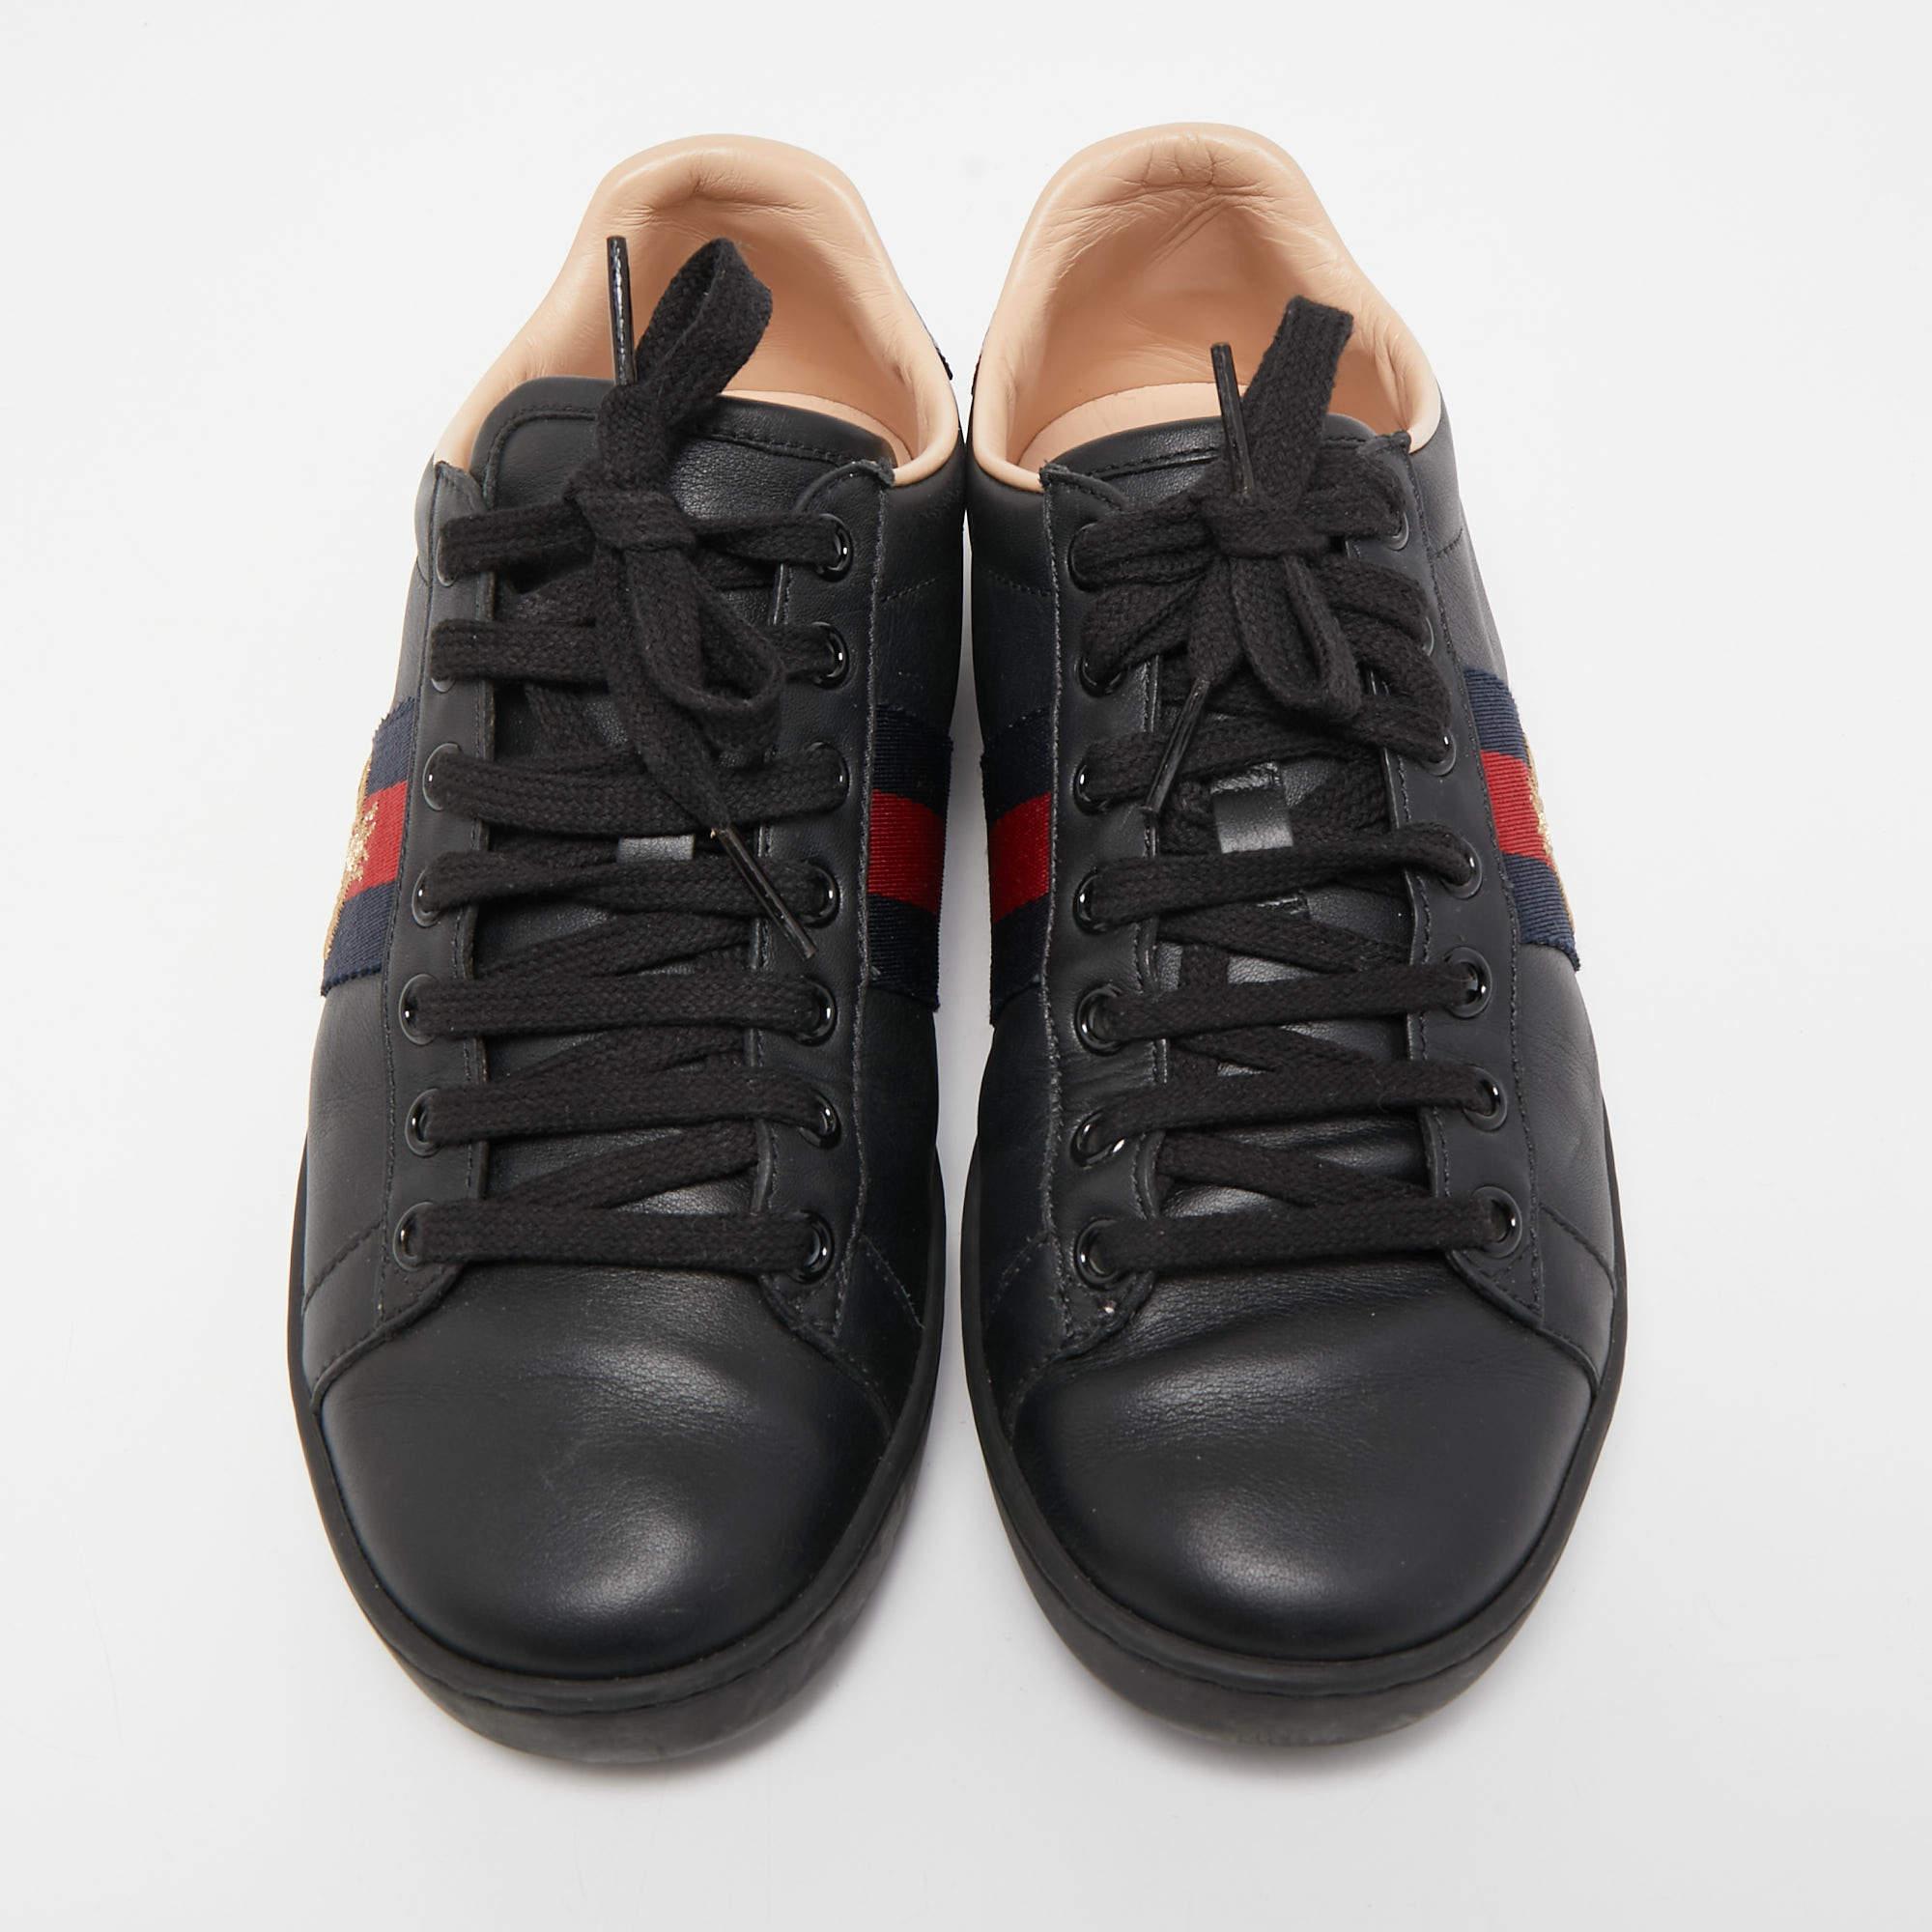 Don't miss out on making these sneakers yours this season. Crafted from leather, these black Ace sneakers feature lace-up vamps, rubber soles, and leather insoles for added comfort. These classy sneakers from Gucci will be super easy to